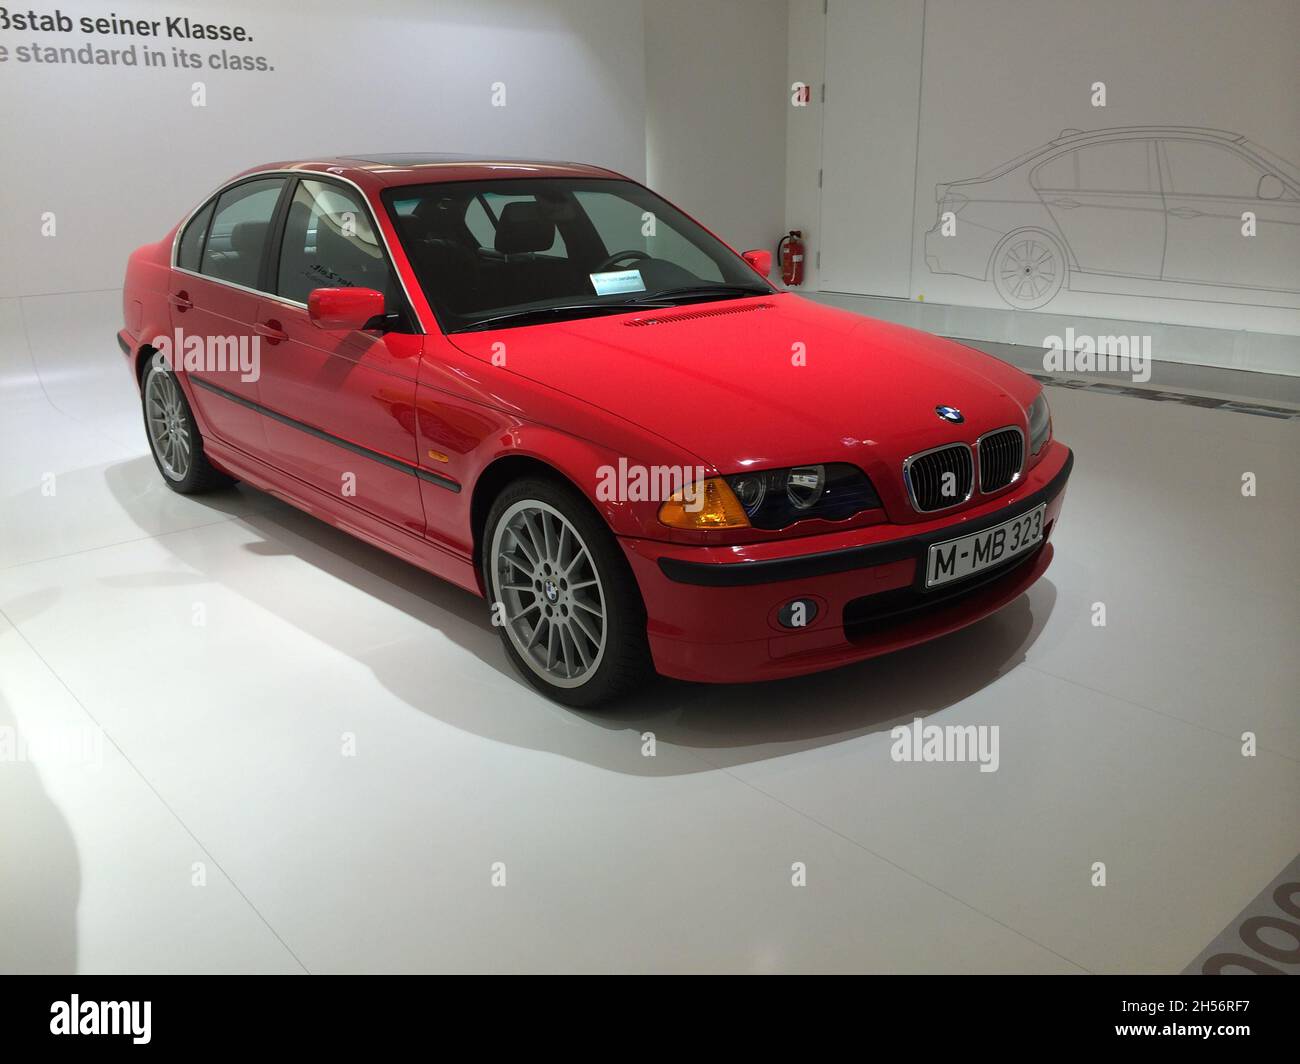 BMW 3 Series (E46): Side view, color red, 4th generation, manufactured from 1998 to 2006. BMW Museum, Munich - Germany - September 2013. Stock Photo